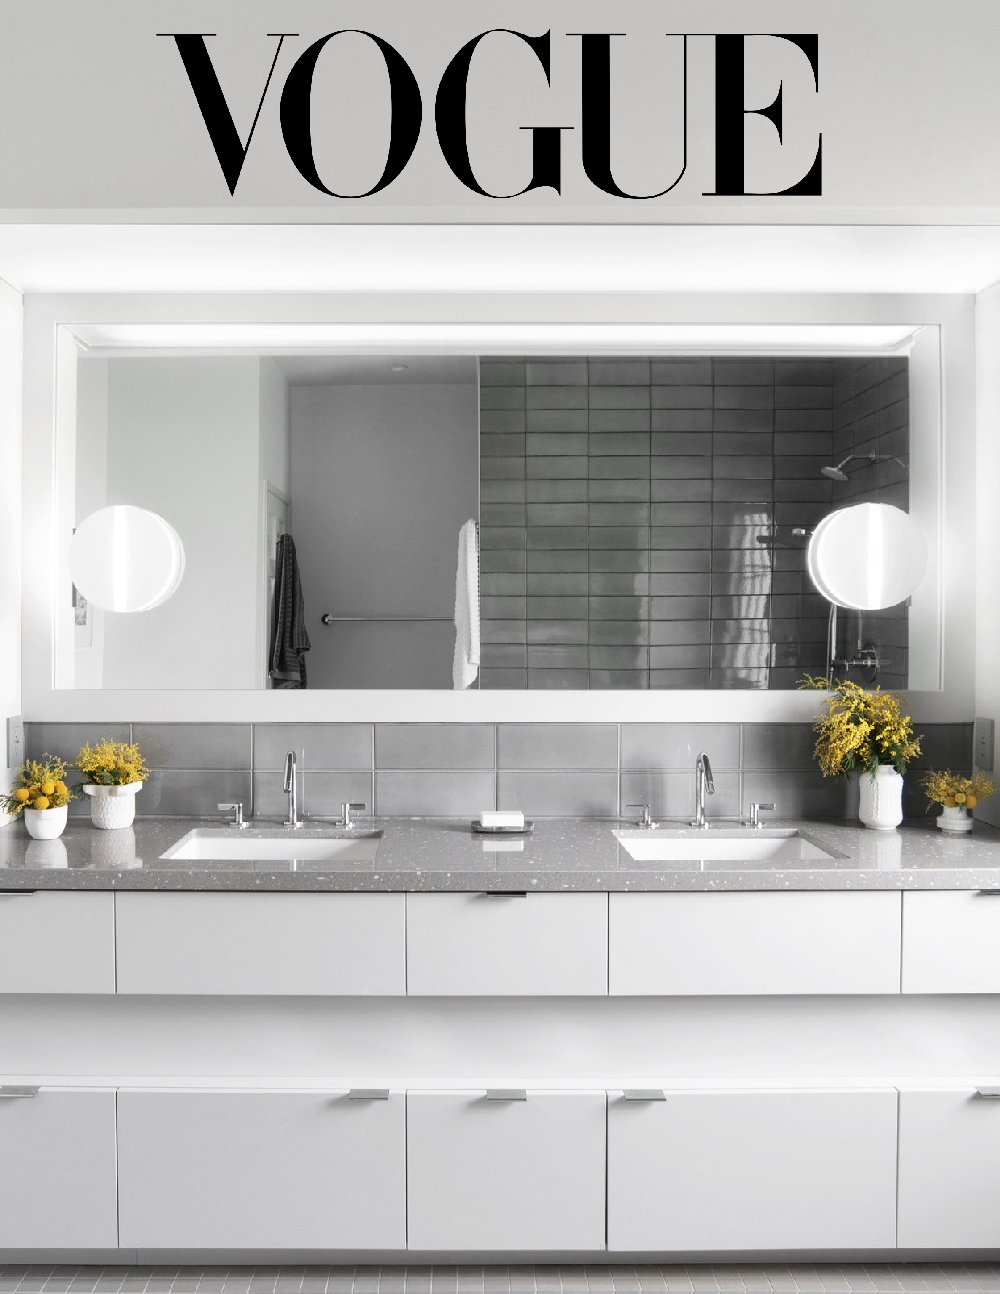  Vogue Article quoting Sara Barnard  on how cleaning can support happiness.  